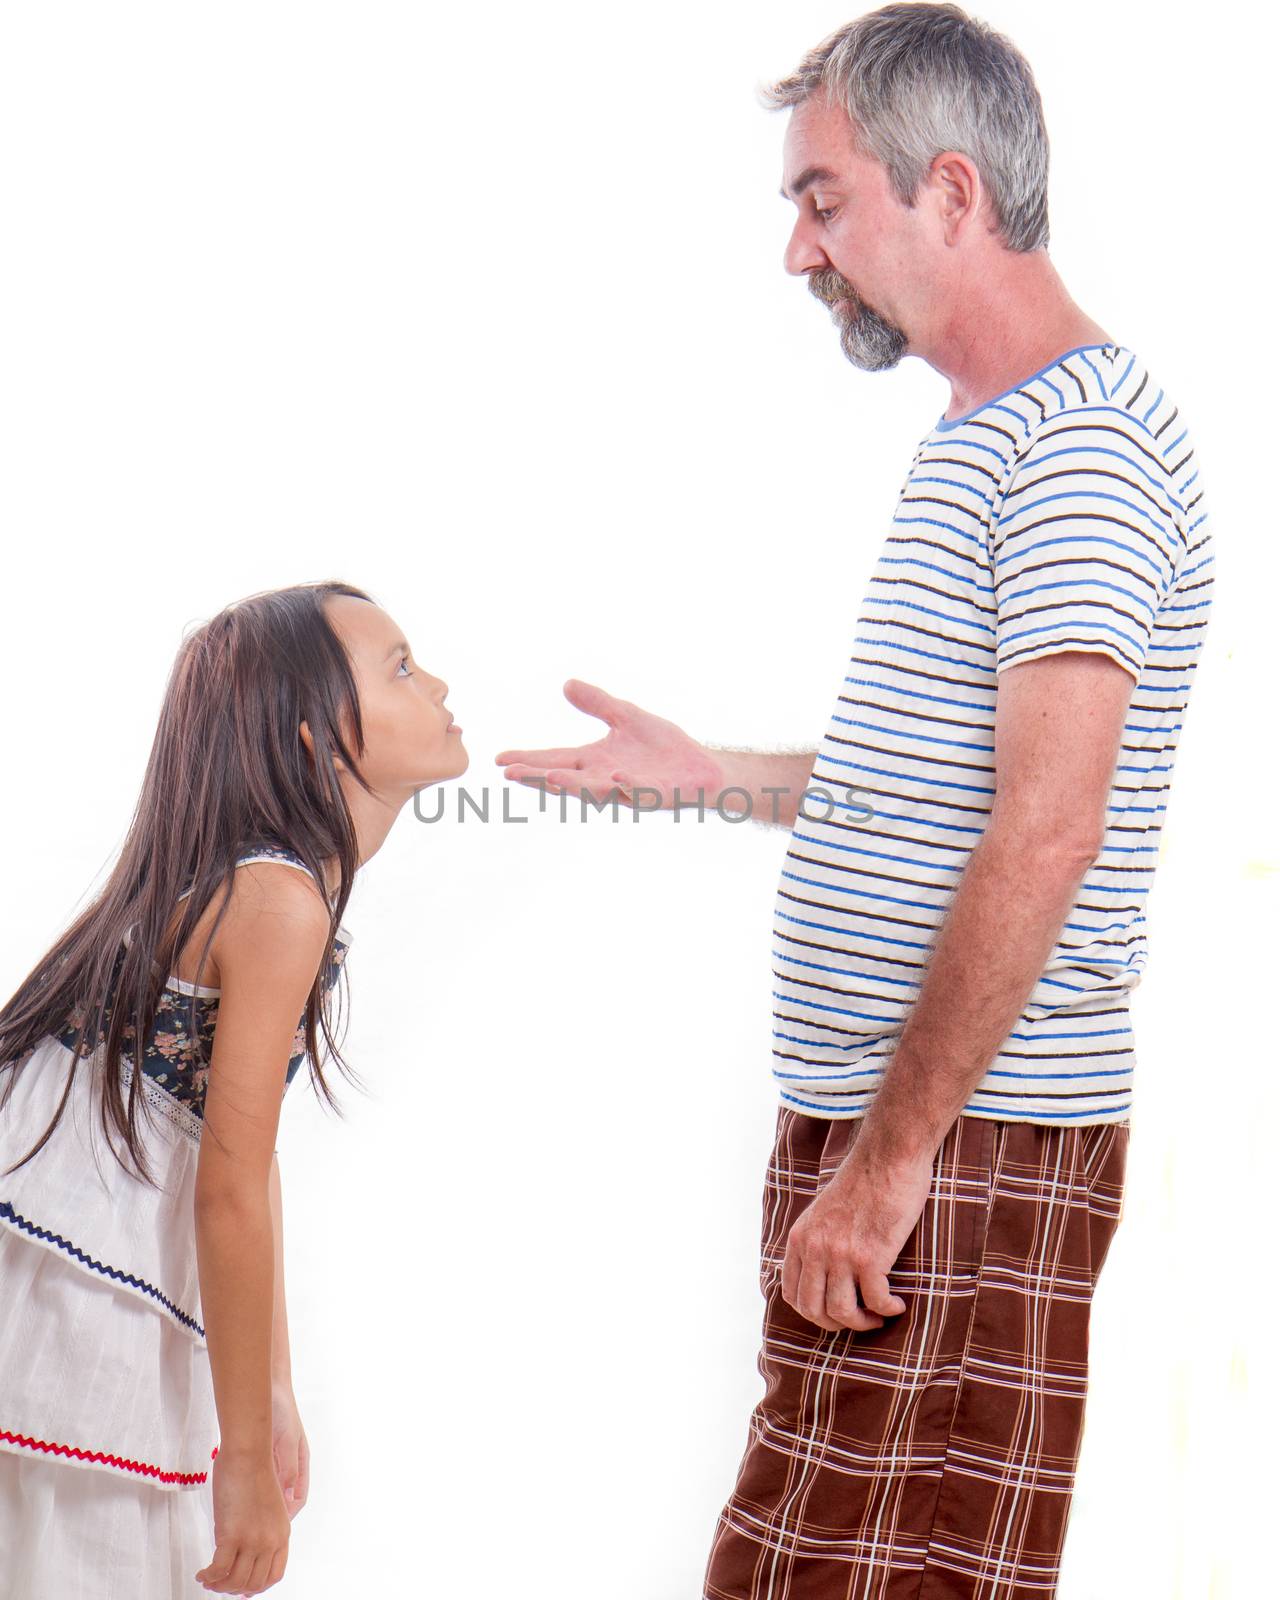 Father scolding naughty daughter by imagesbykenny